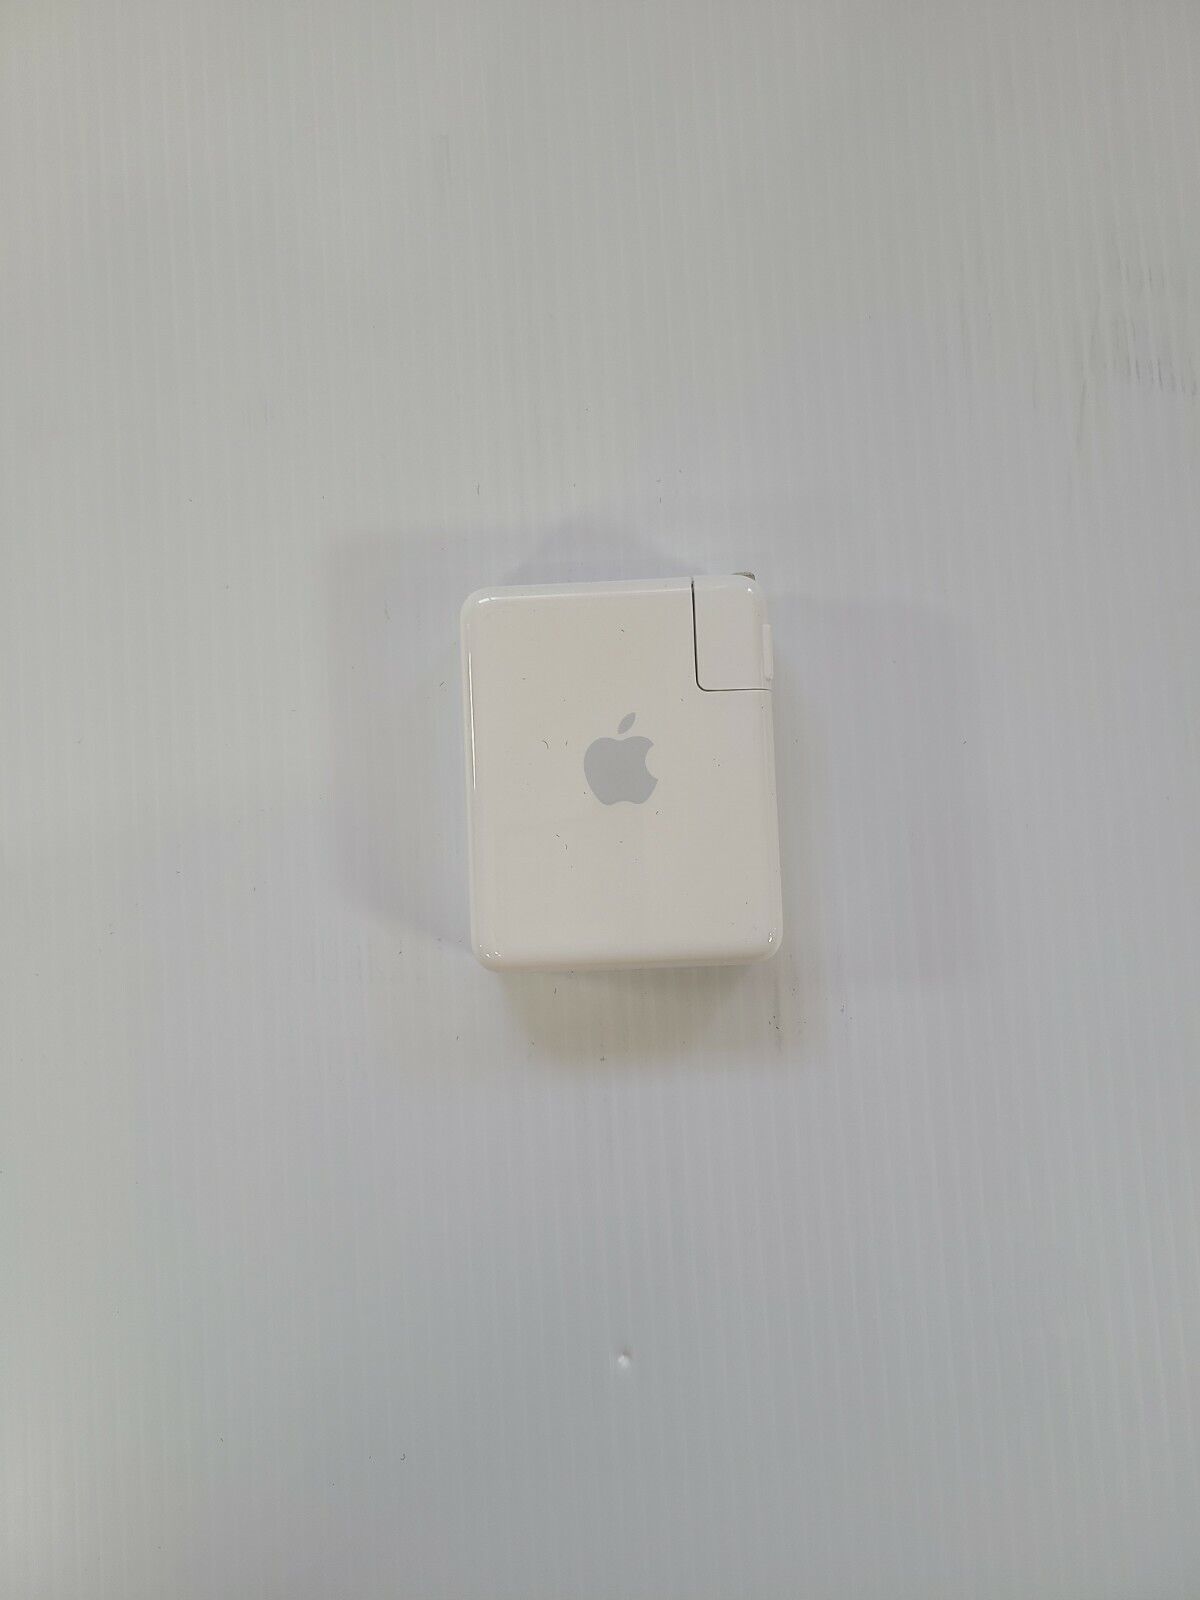 Apple A1264 AirPort Express Base Station